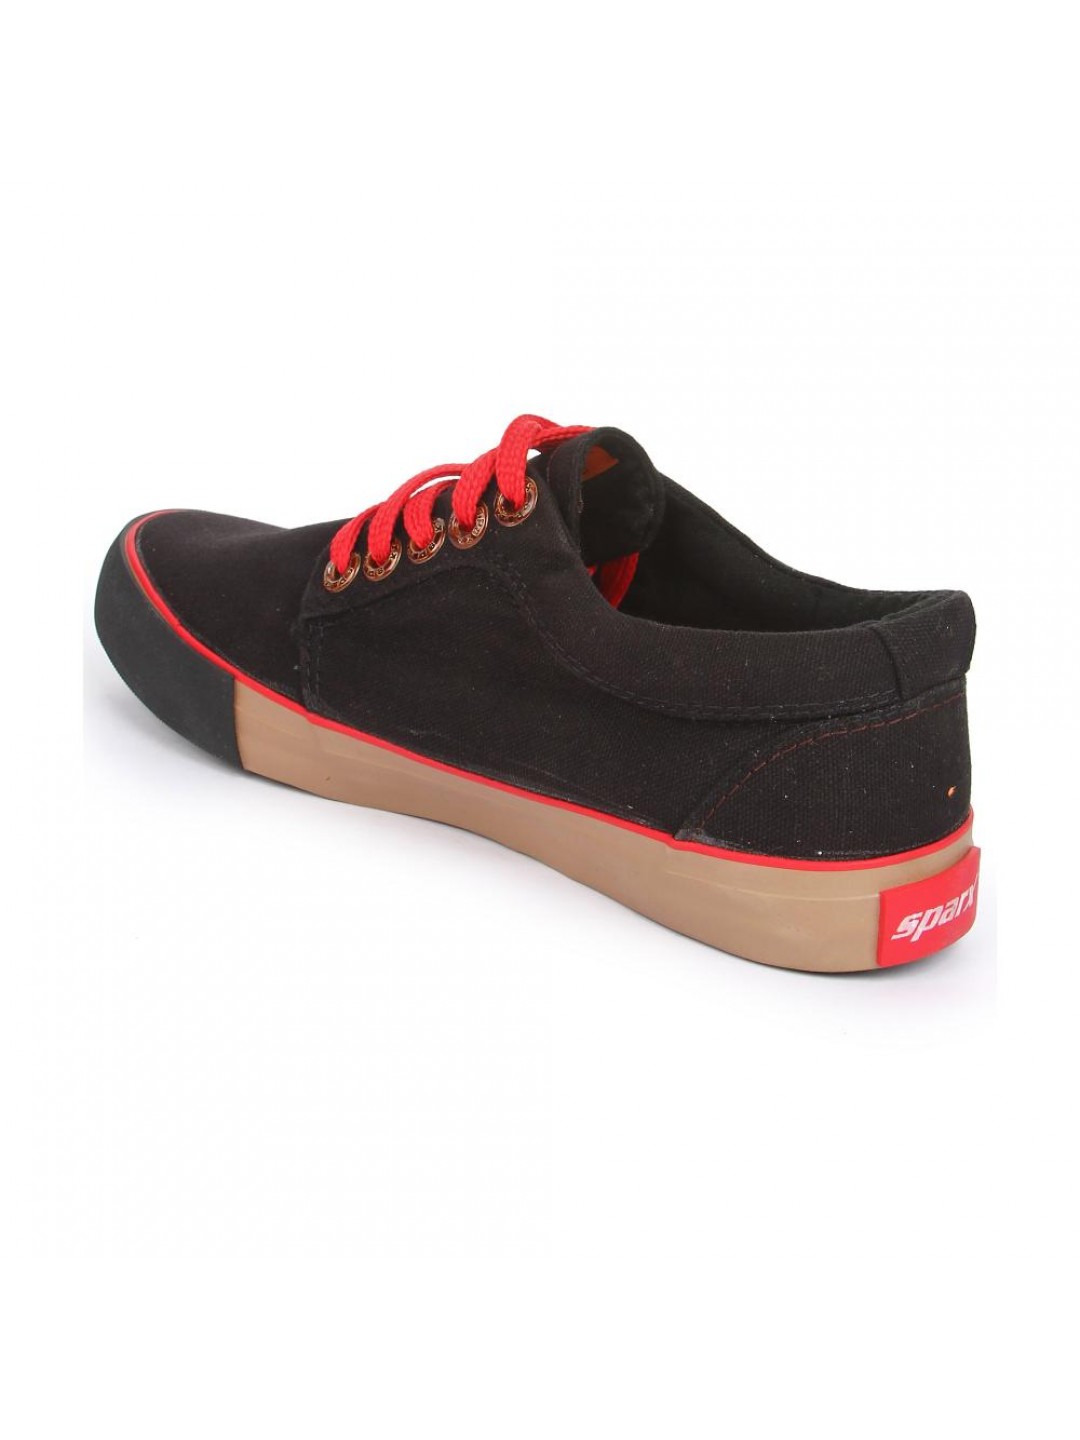 sparx shoes red black